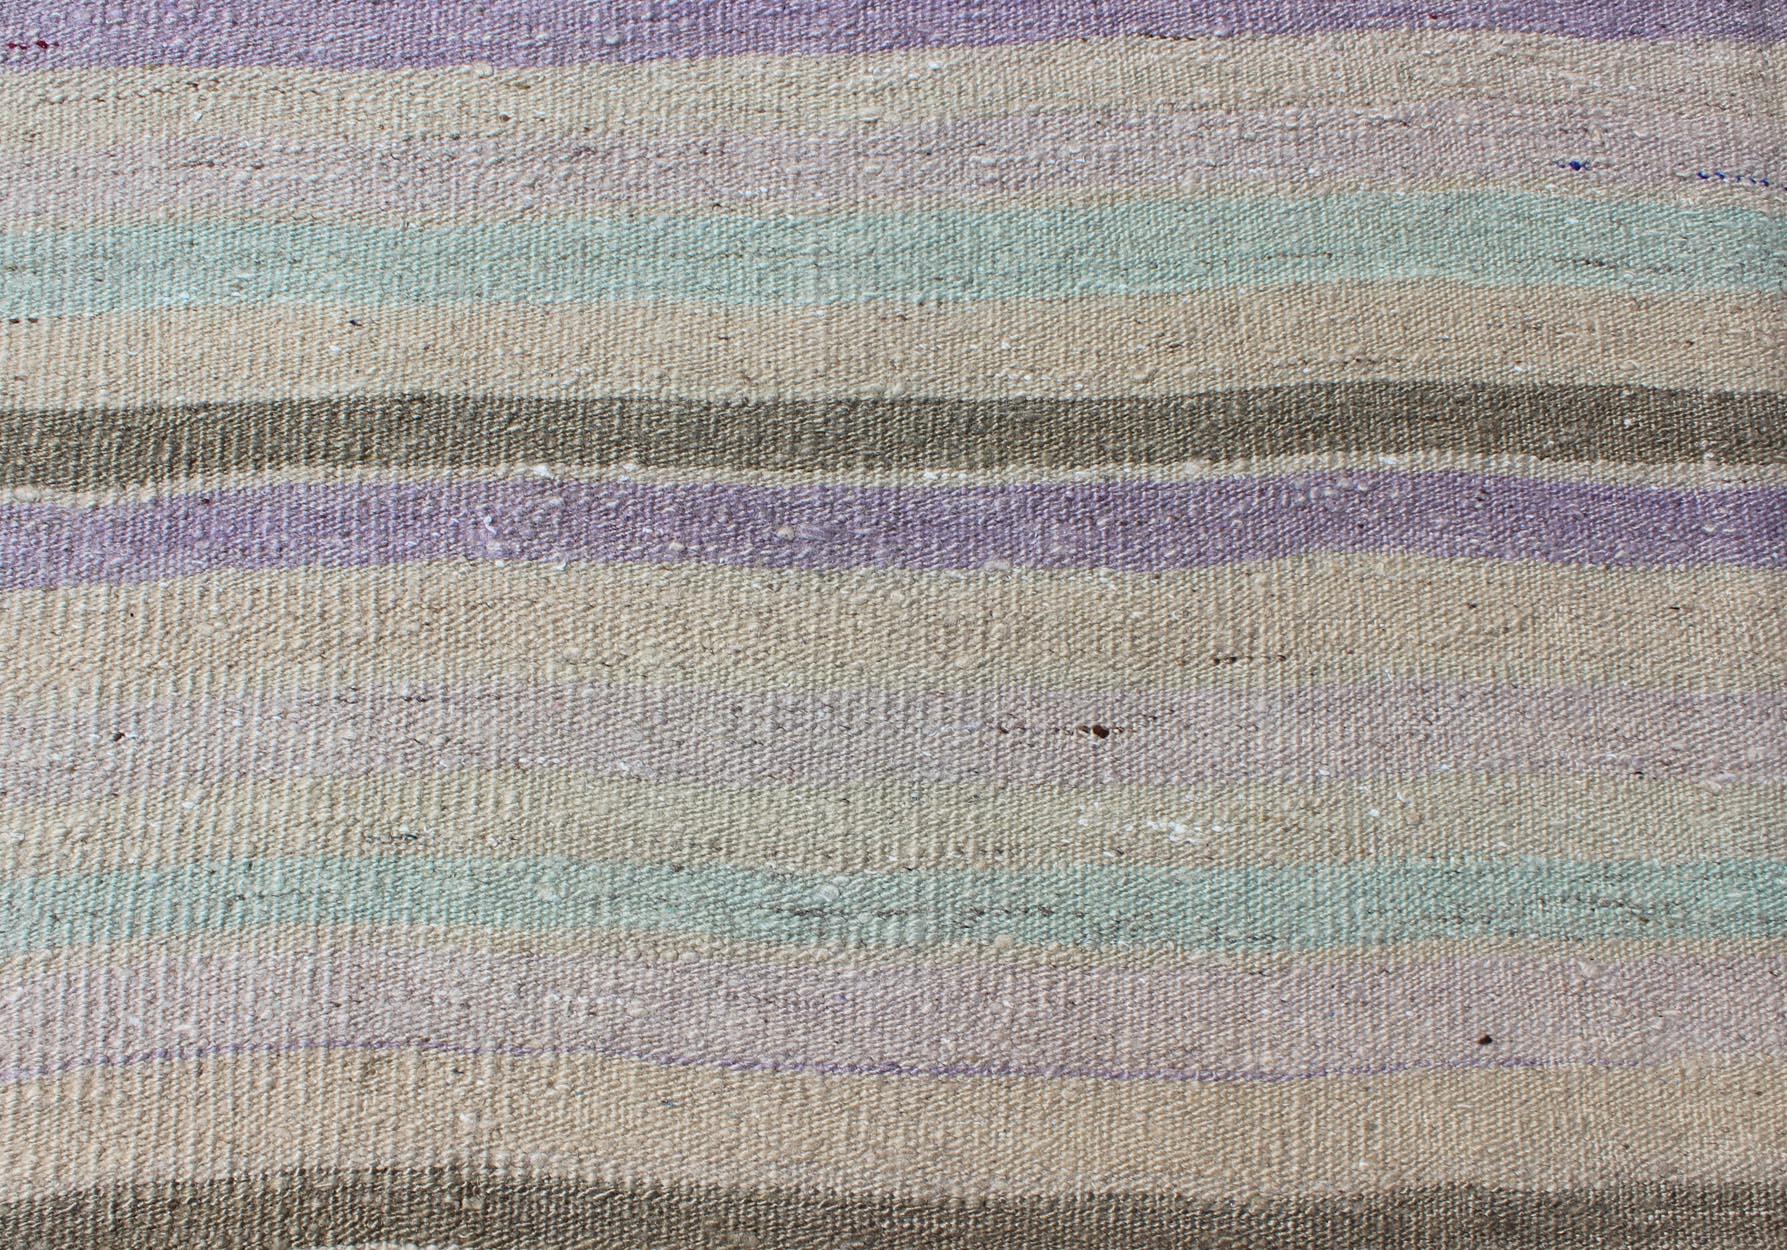 Wool Vintage Turkish Kilim with Stripes in Light Teal, Pastel Purple, Cream and Taupe For Sale